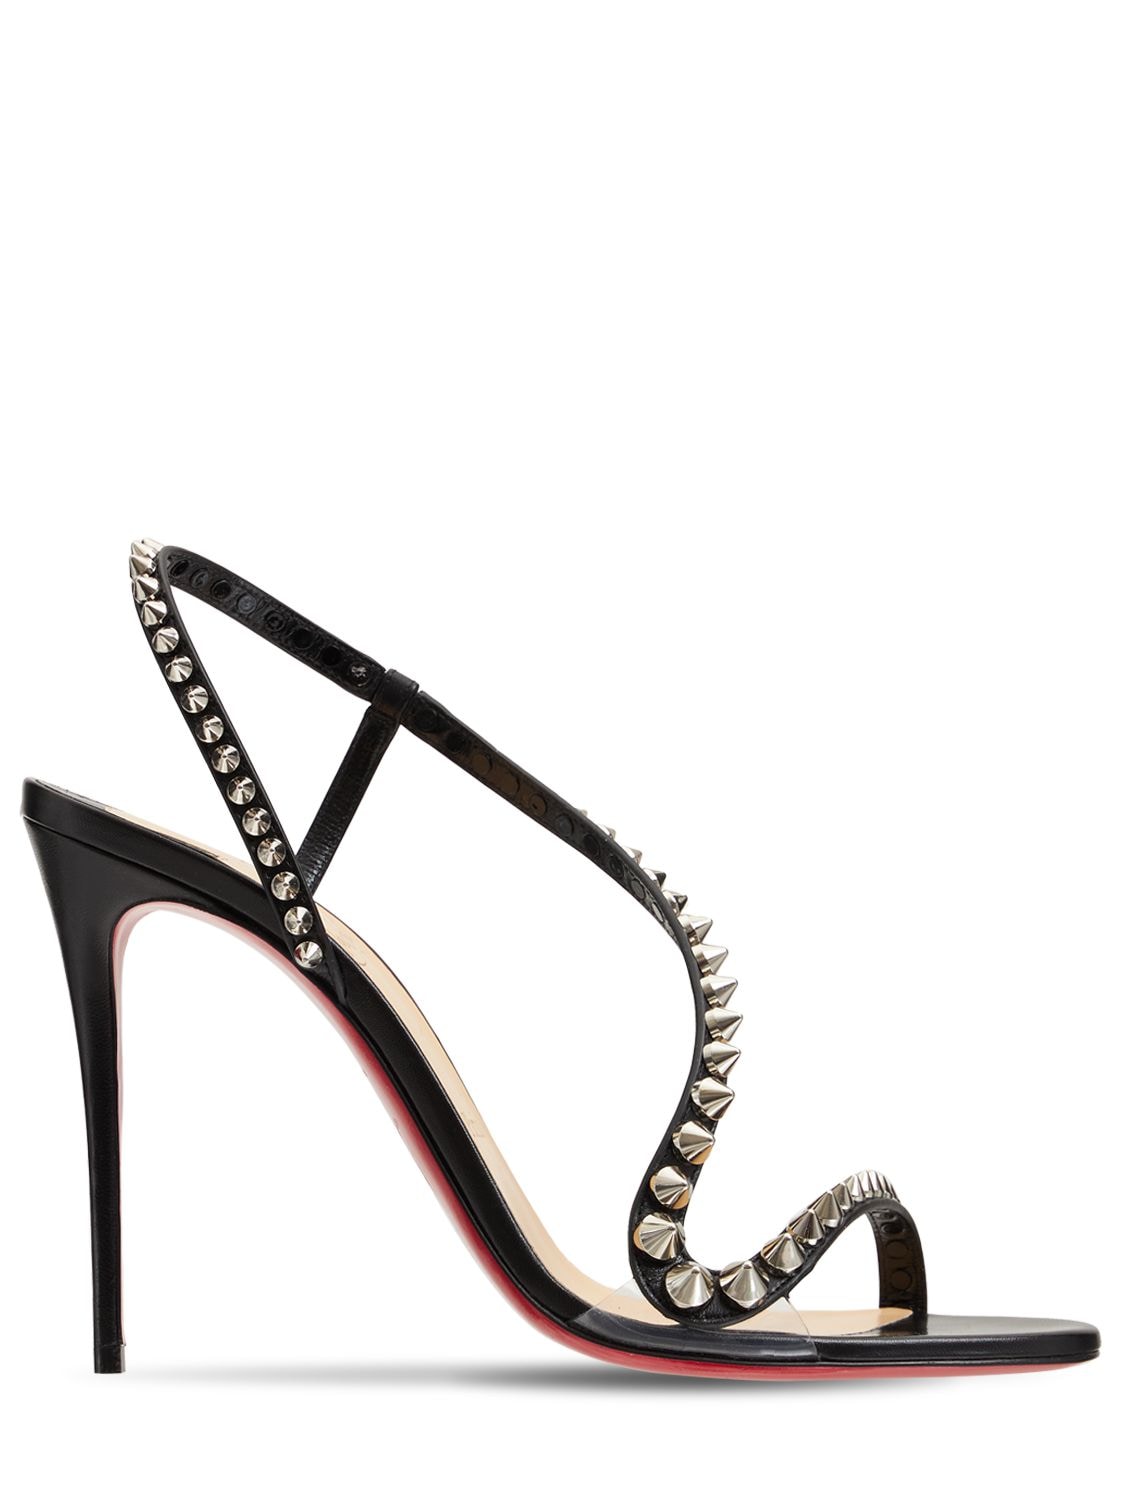 CHRISTIAN LOUBOUTIN 100mm Rosalie Spikes Leather Sandals